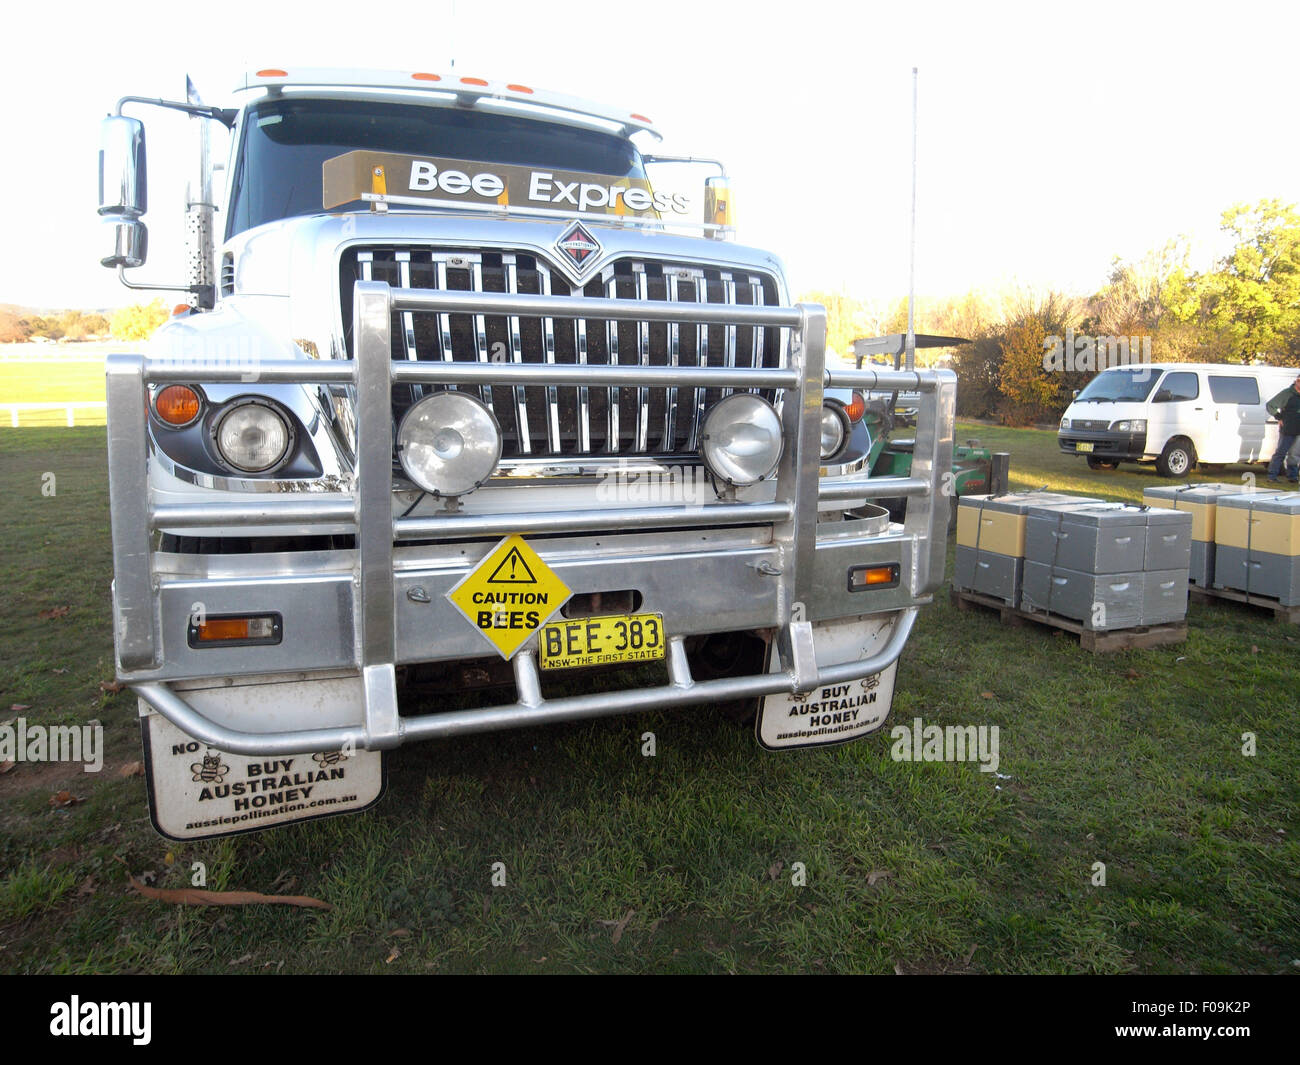 Truck of beekeeper providing pollination services to the agricultural industry, Orange, NSW, Australia. No PR Stock Photo